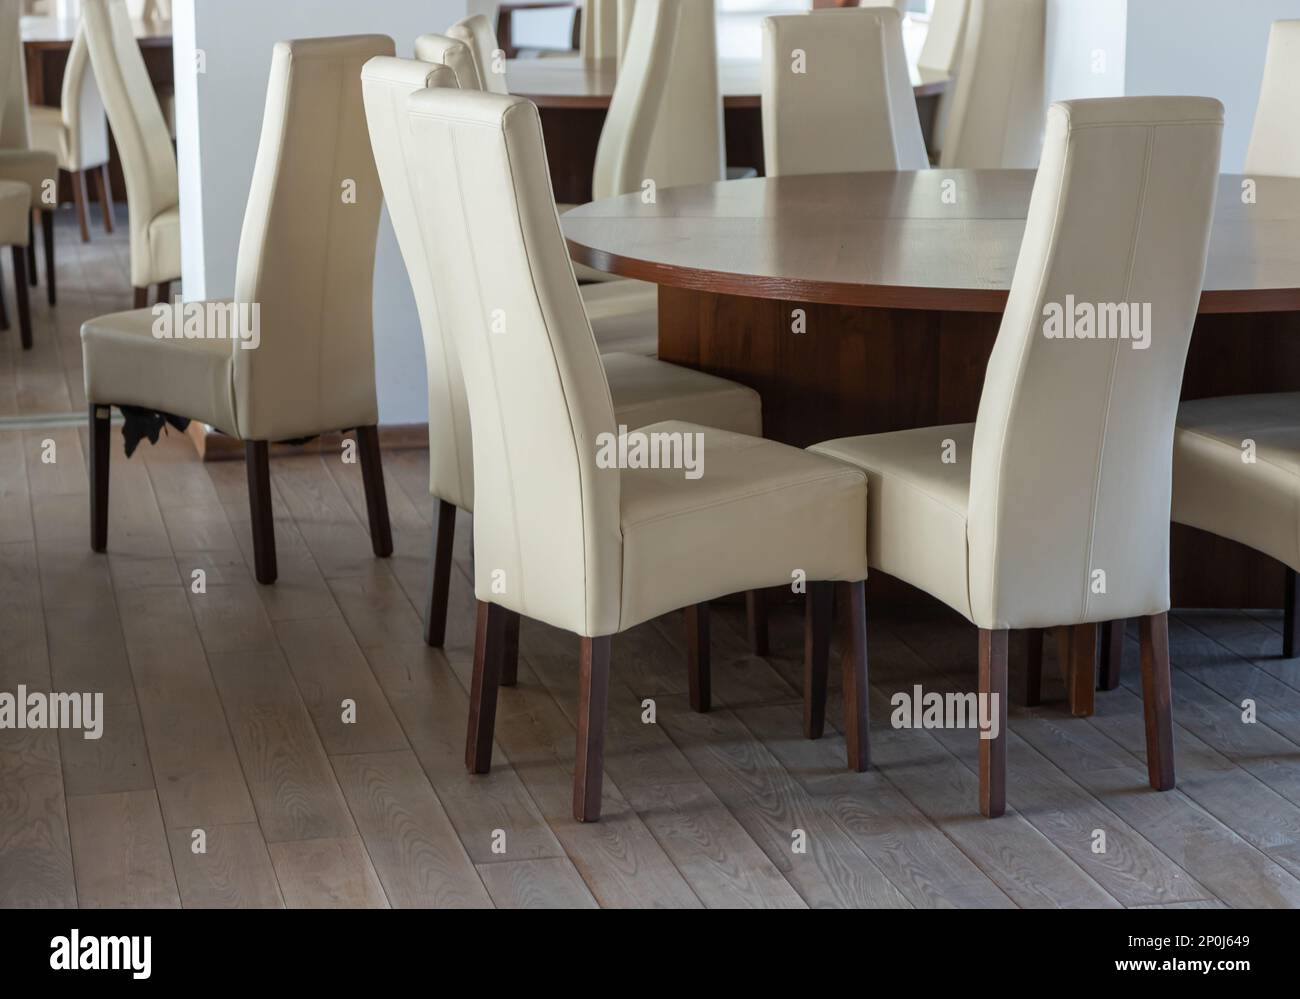 Abstract modern interior of cafe or meeting room with rounded armchairs. Stock Photo